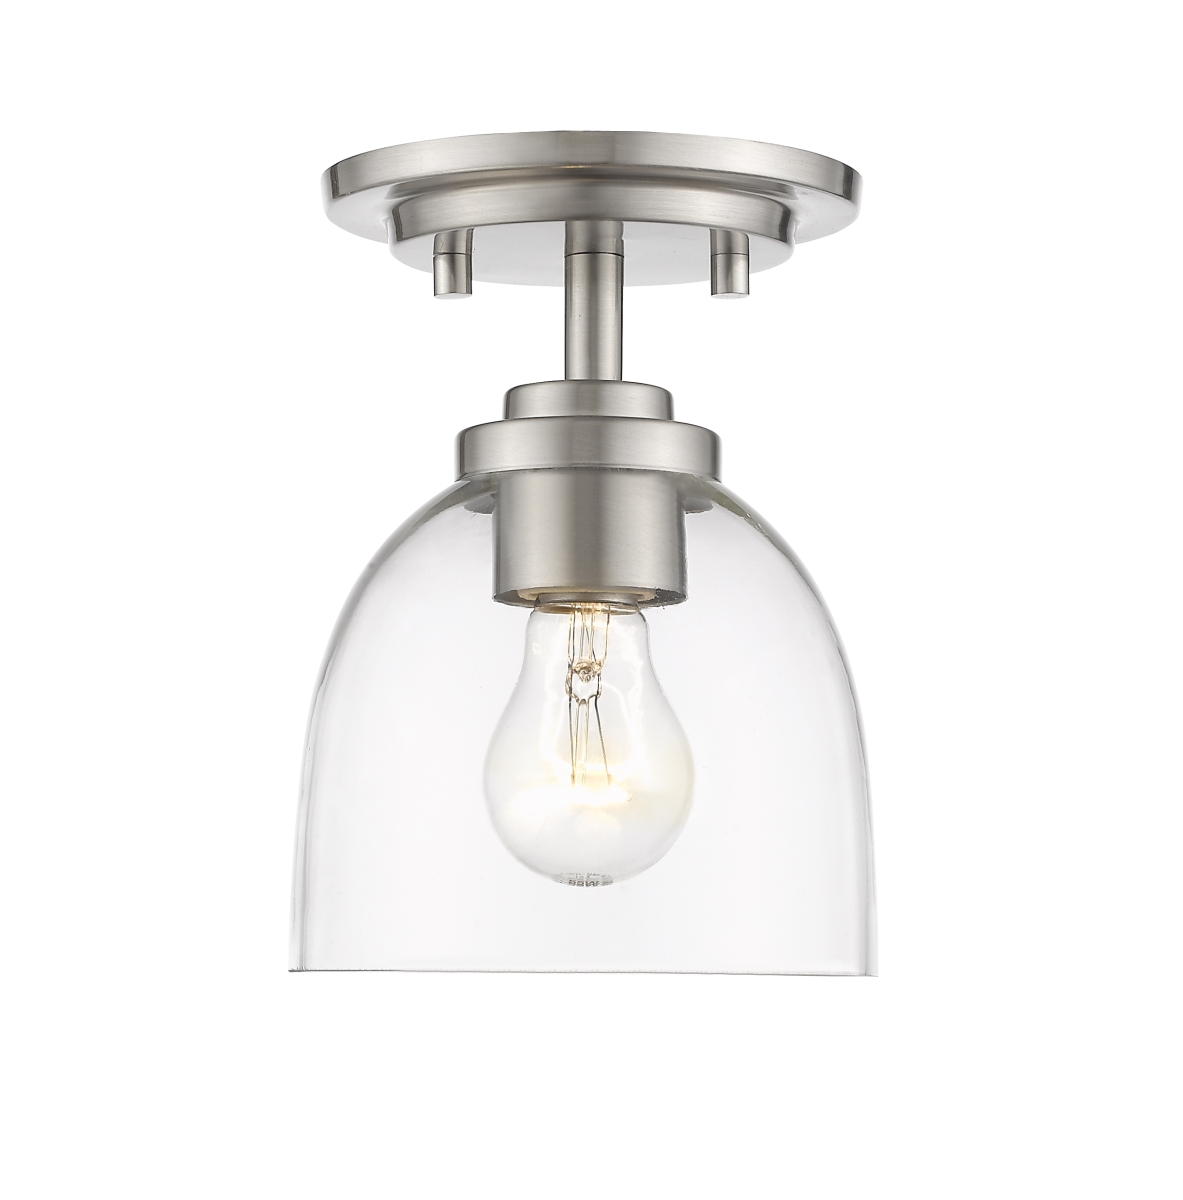 Z Lite 460f1-bn Ashton 1 Light Flush Mount With Clear Glass, Brushed Nickel - 7.25 X 6 X 6 In.